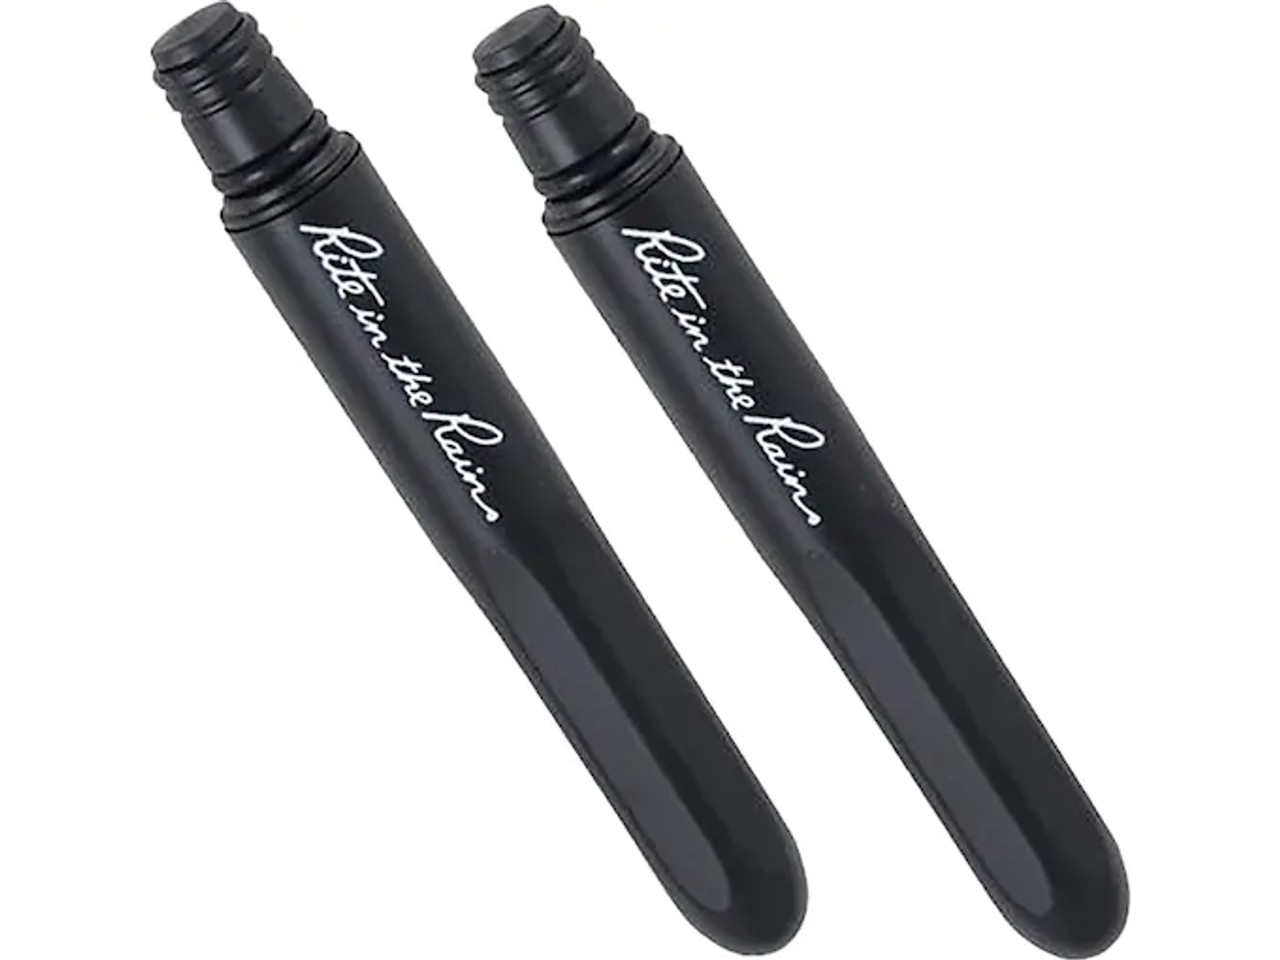  Rite in the Rain All Weather Pen Refill, Black (3 Pack) : Write  In The Rain Pen : Office Products